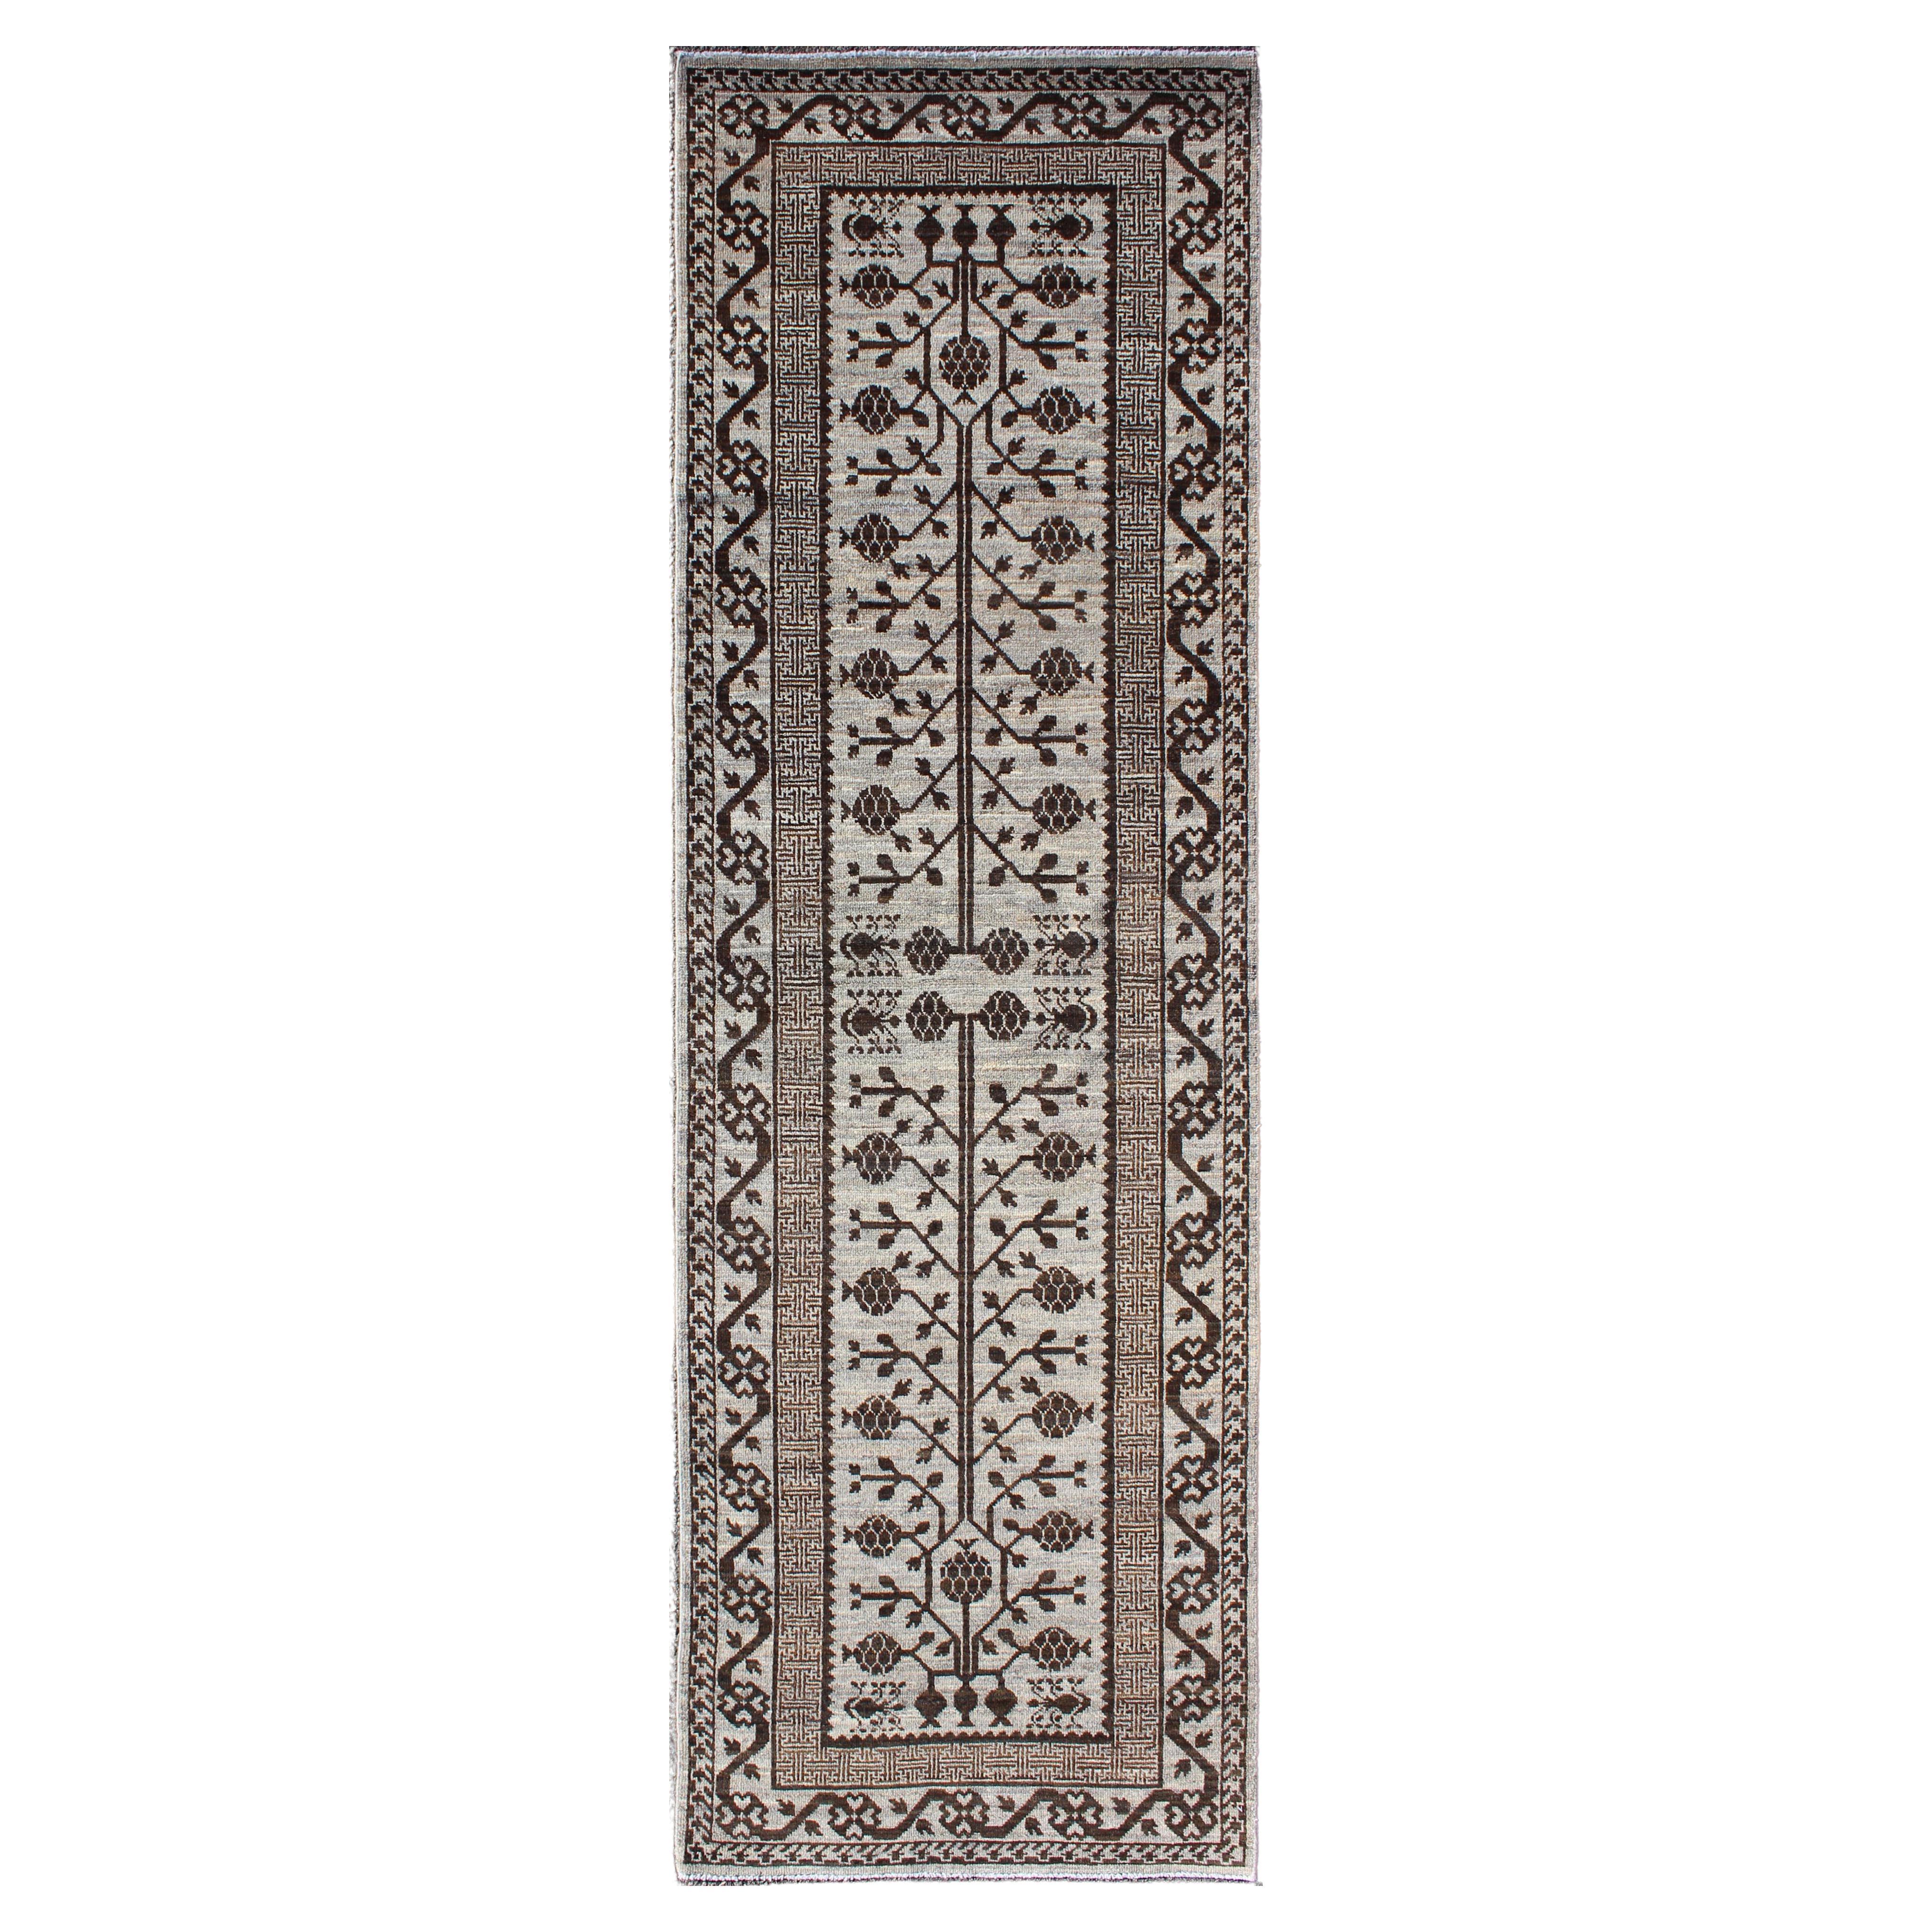 Khotan Runner with All-Over Geometric-Pomegranate Pattern in Grey and Brown